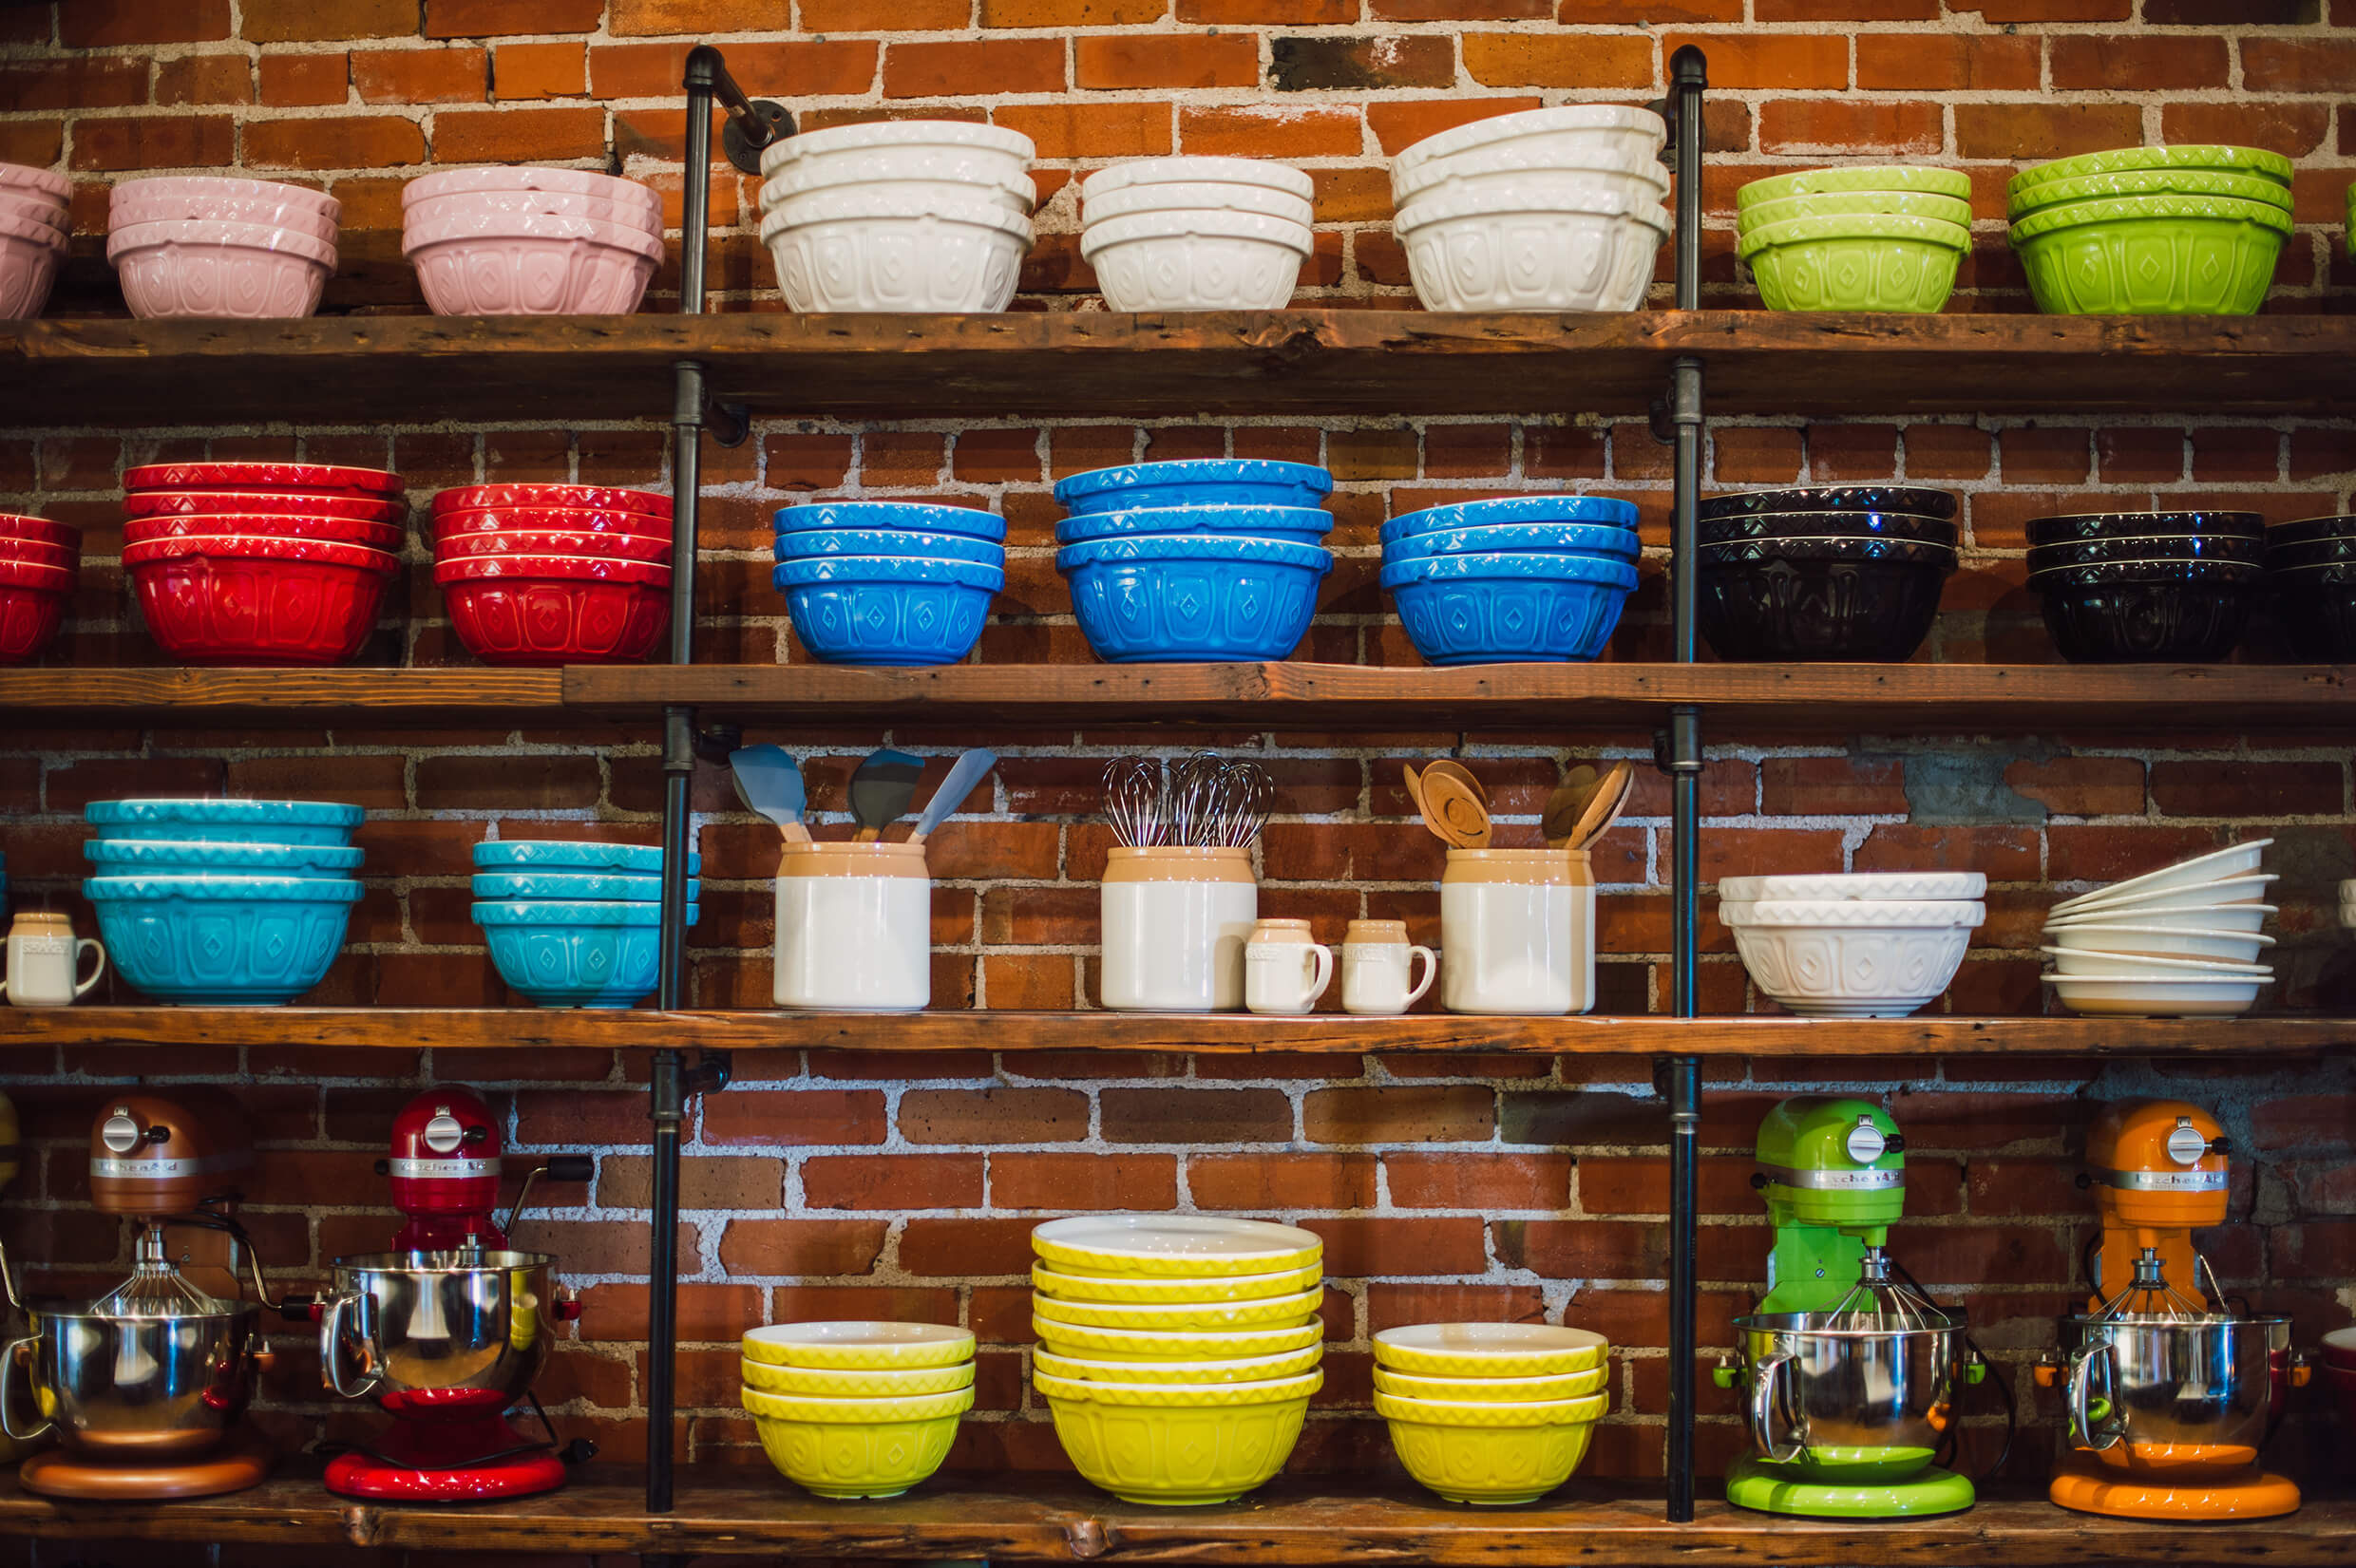 Colorful mixers and bowls in The Ginger and Baker Teaching Kitchen